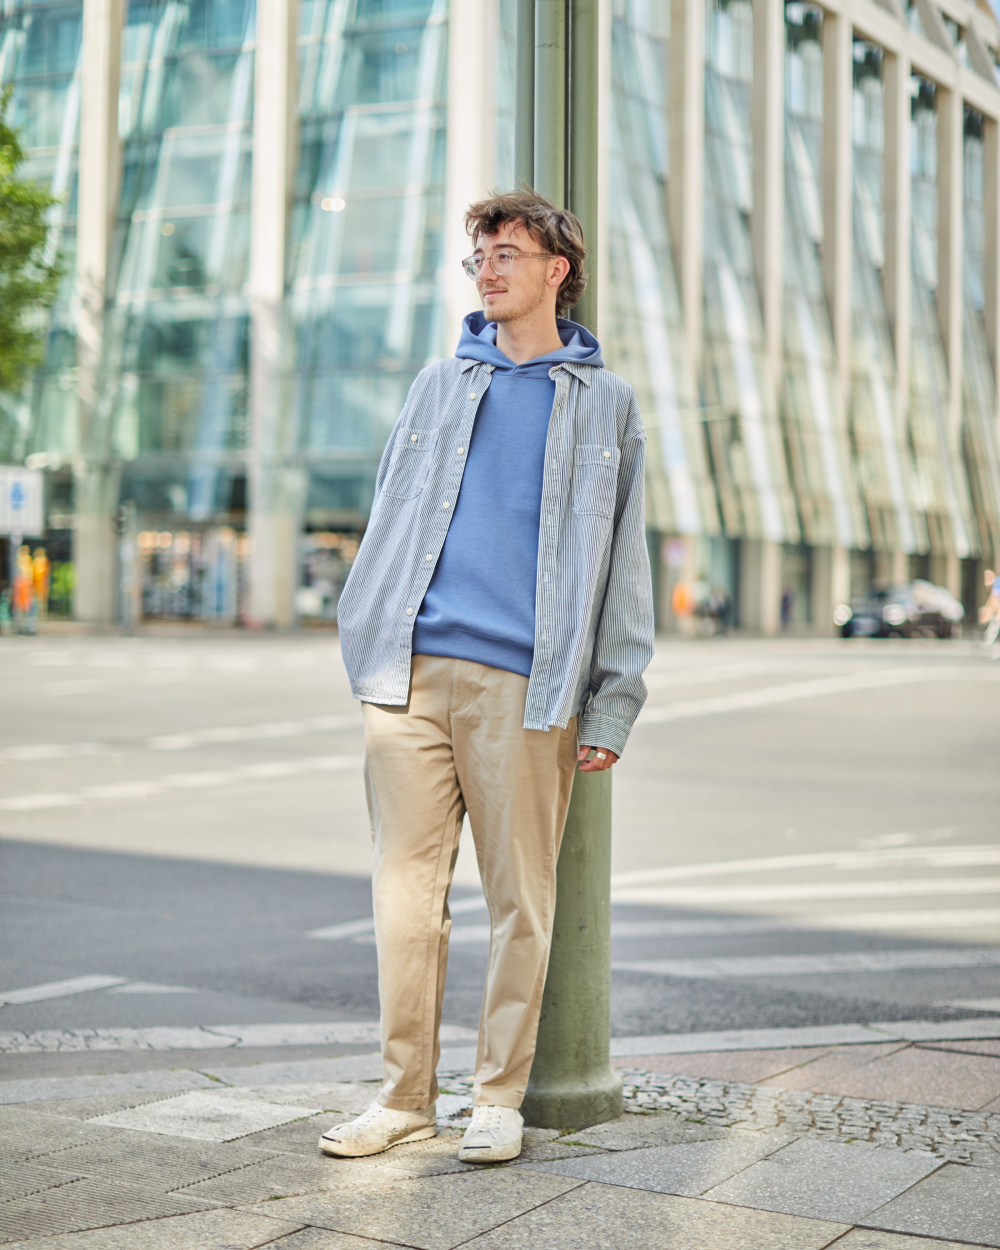 Check styling ideas for「HICKORY WORK SHIRT、COTTON RELAXED ANKLE PANTS」